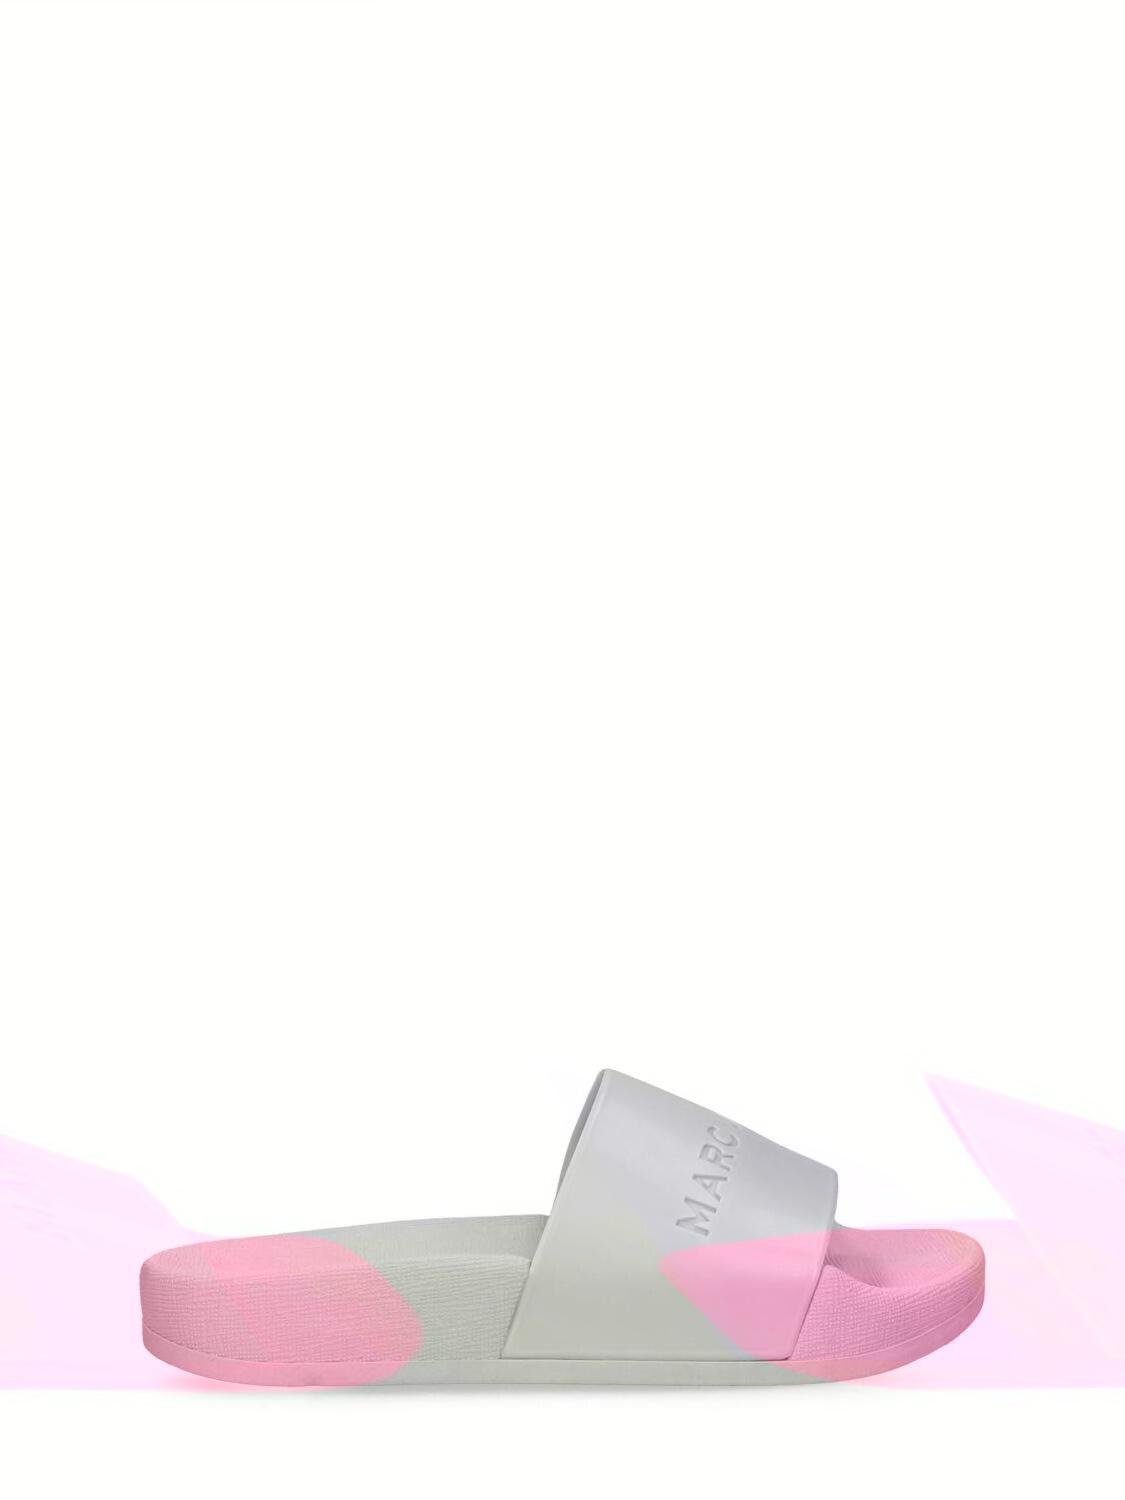 Monochromatic Rubber Slides by MARC JACOBS